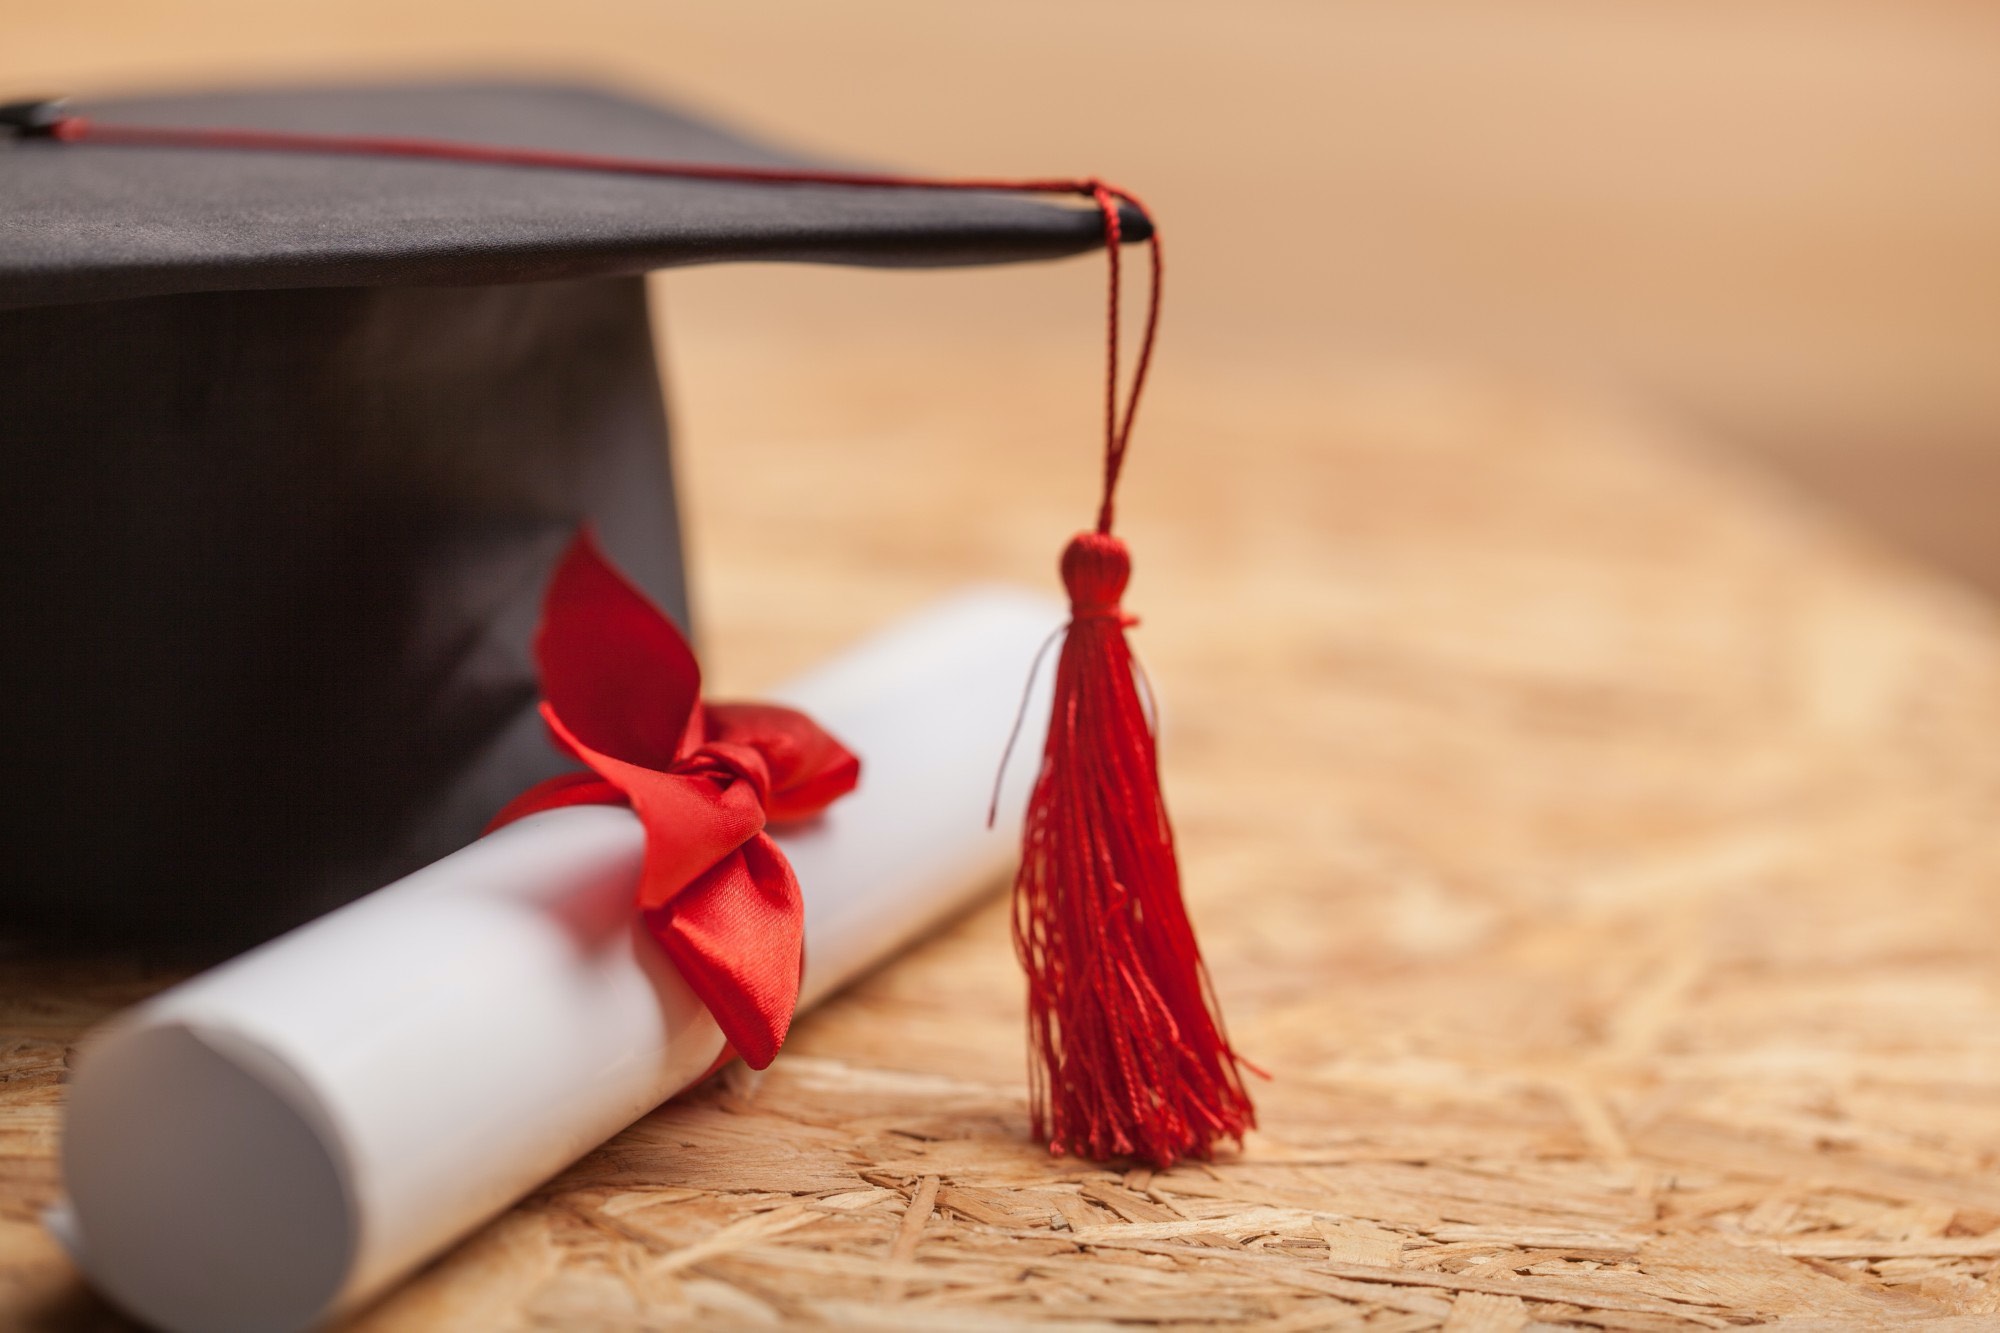 The Top 6 Reasons Why People Use a Phony Diploma